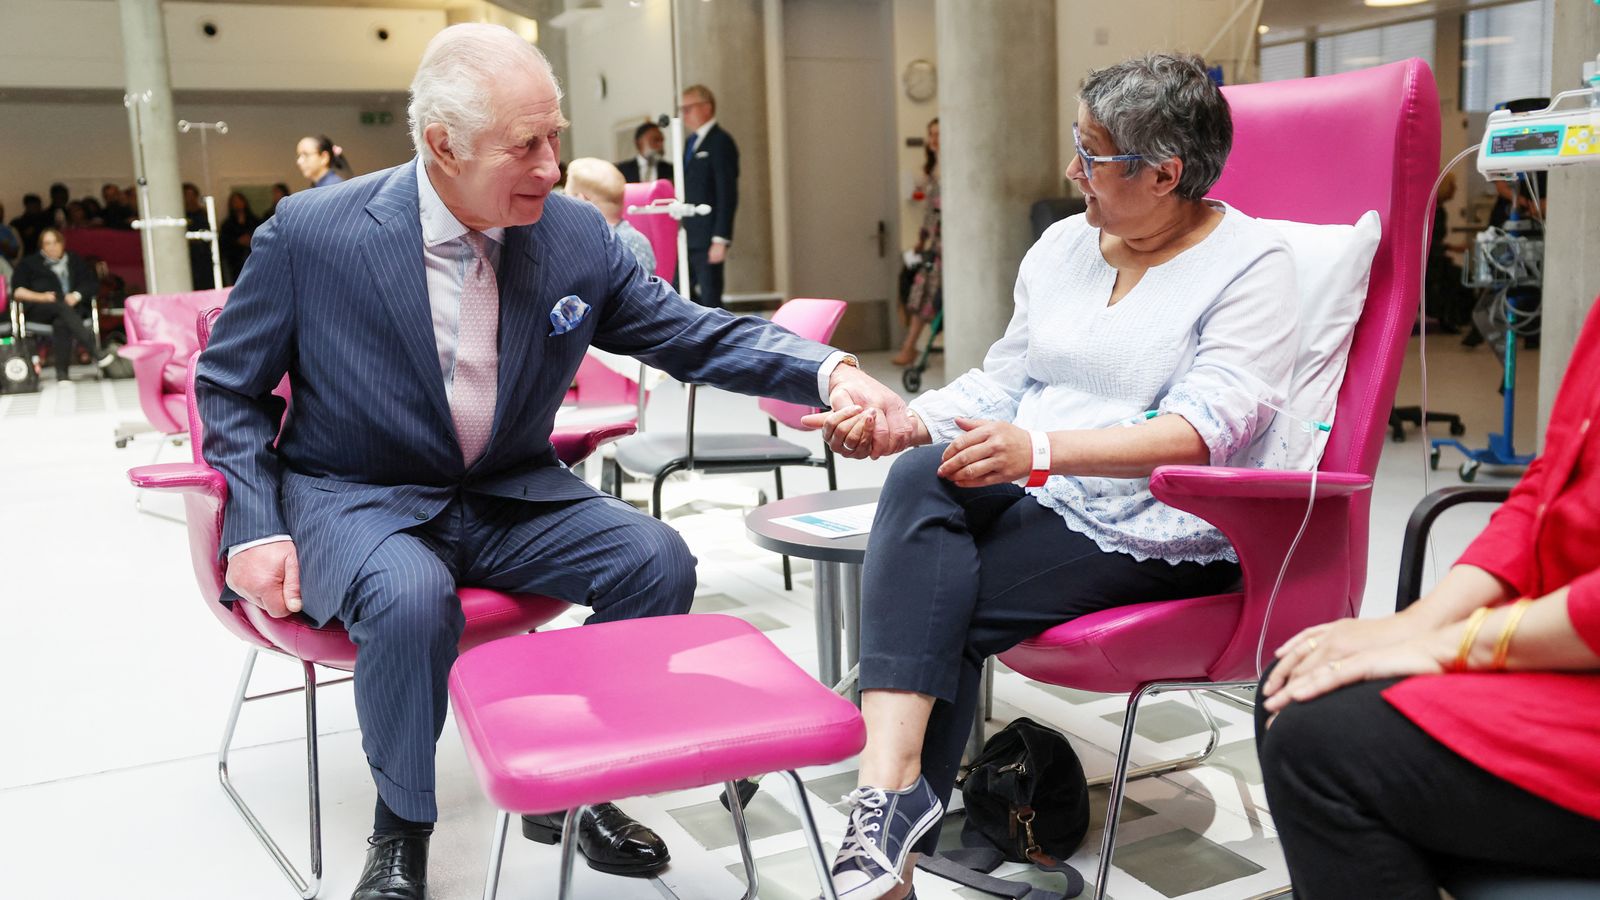 King Charles talks about his health as he holds hands with cancer patients on return to public duties